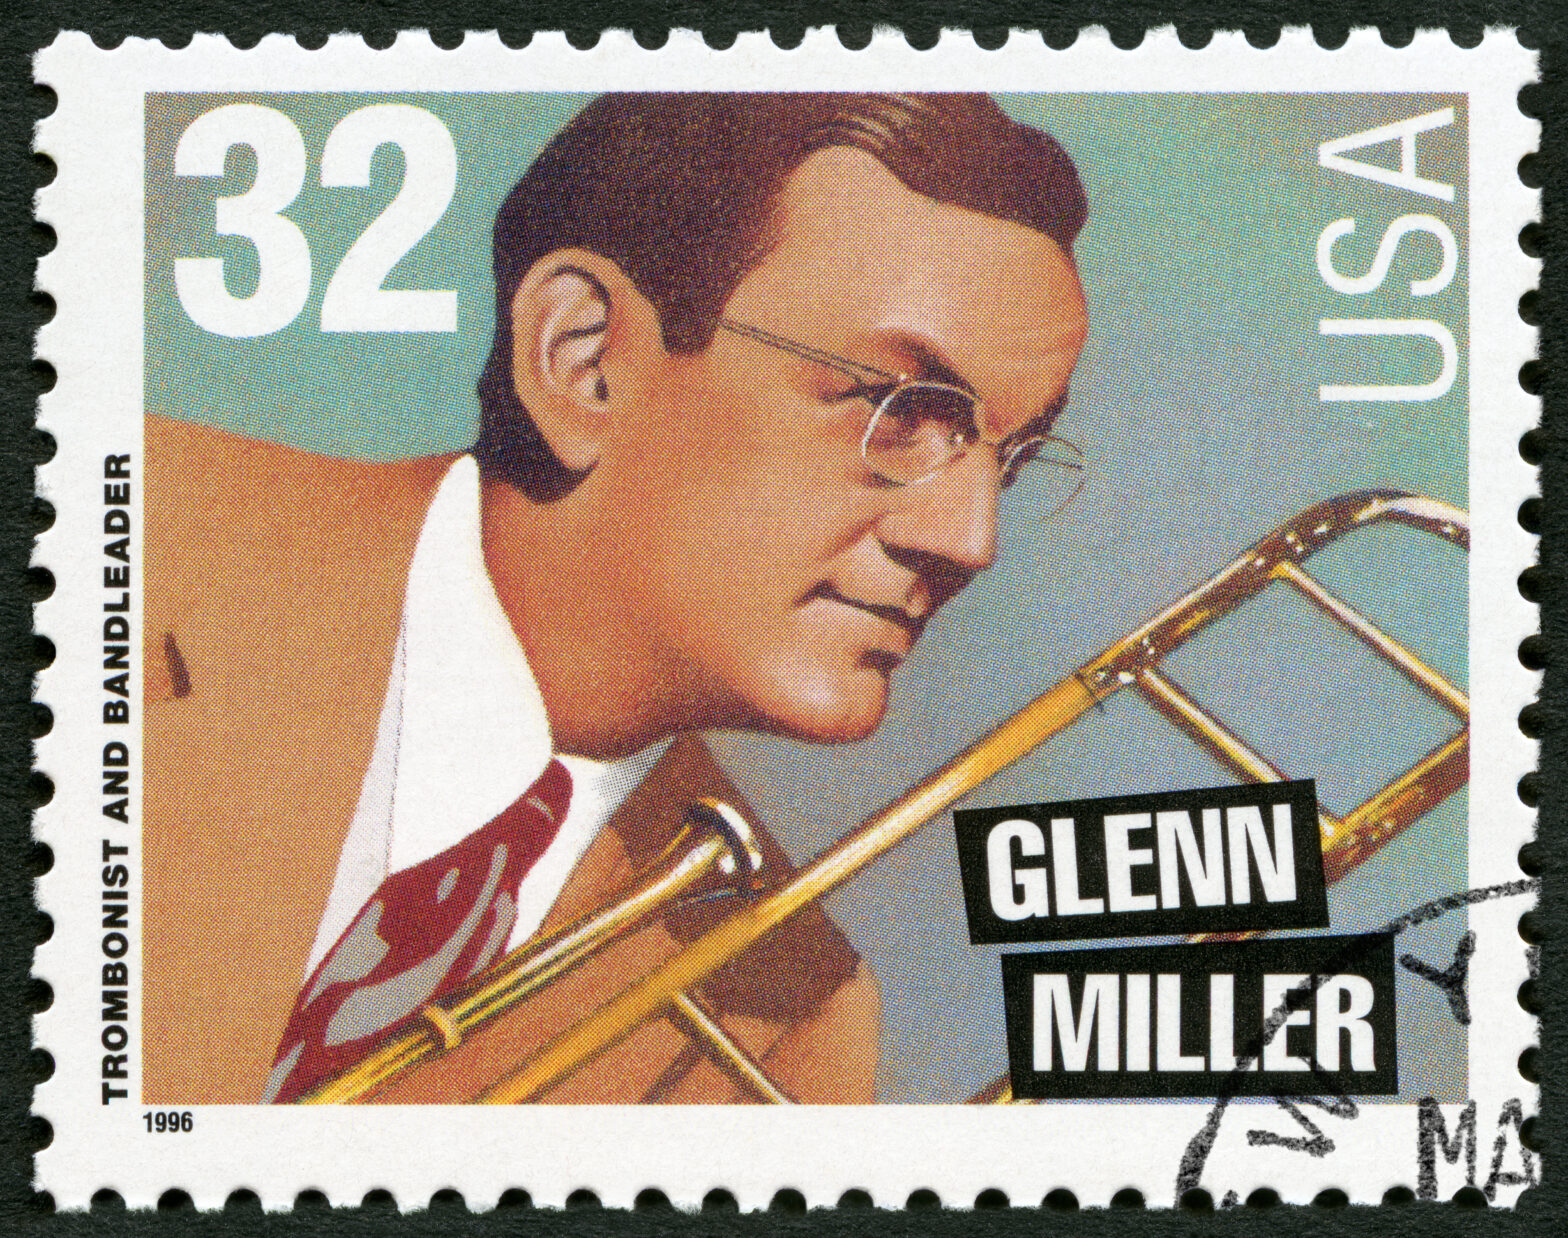 The Glenn Miller Band: Music that Inspired the Troops